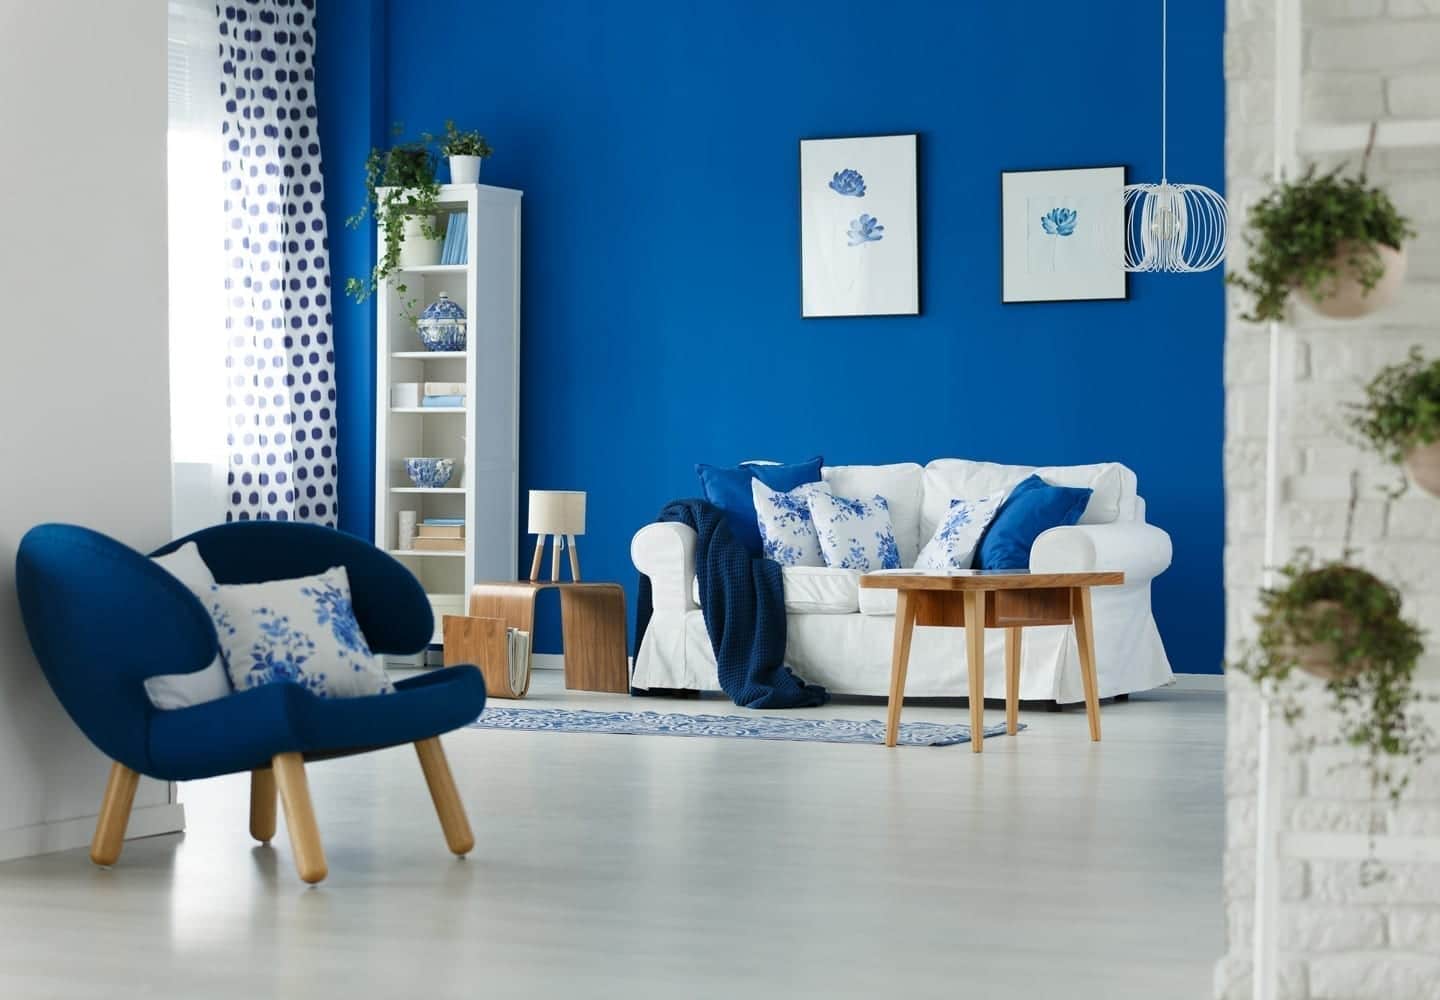 A living room decorated with a simple blue and white color scheme.